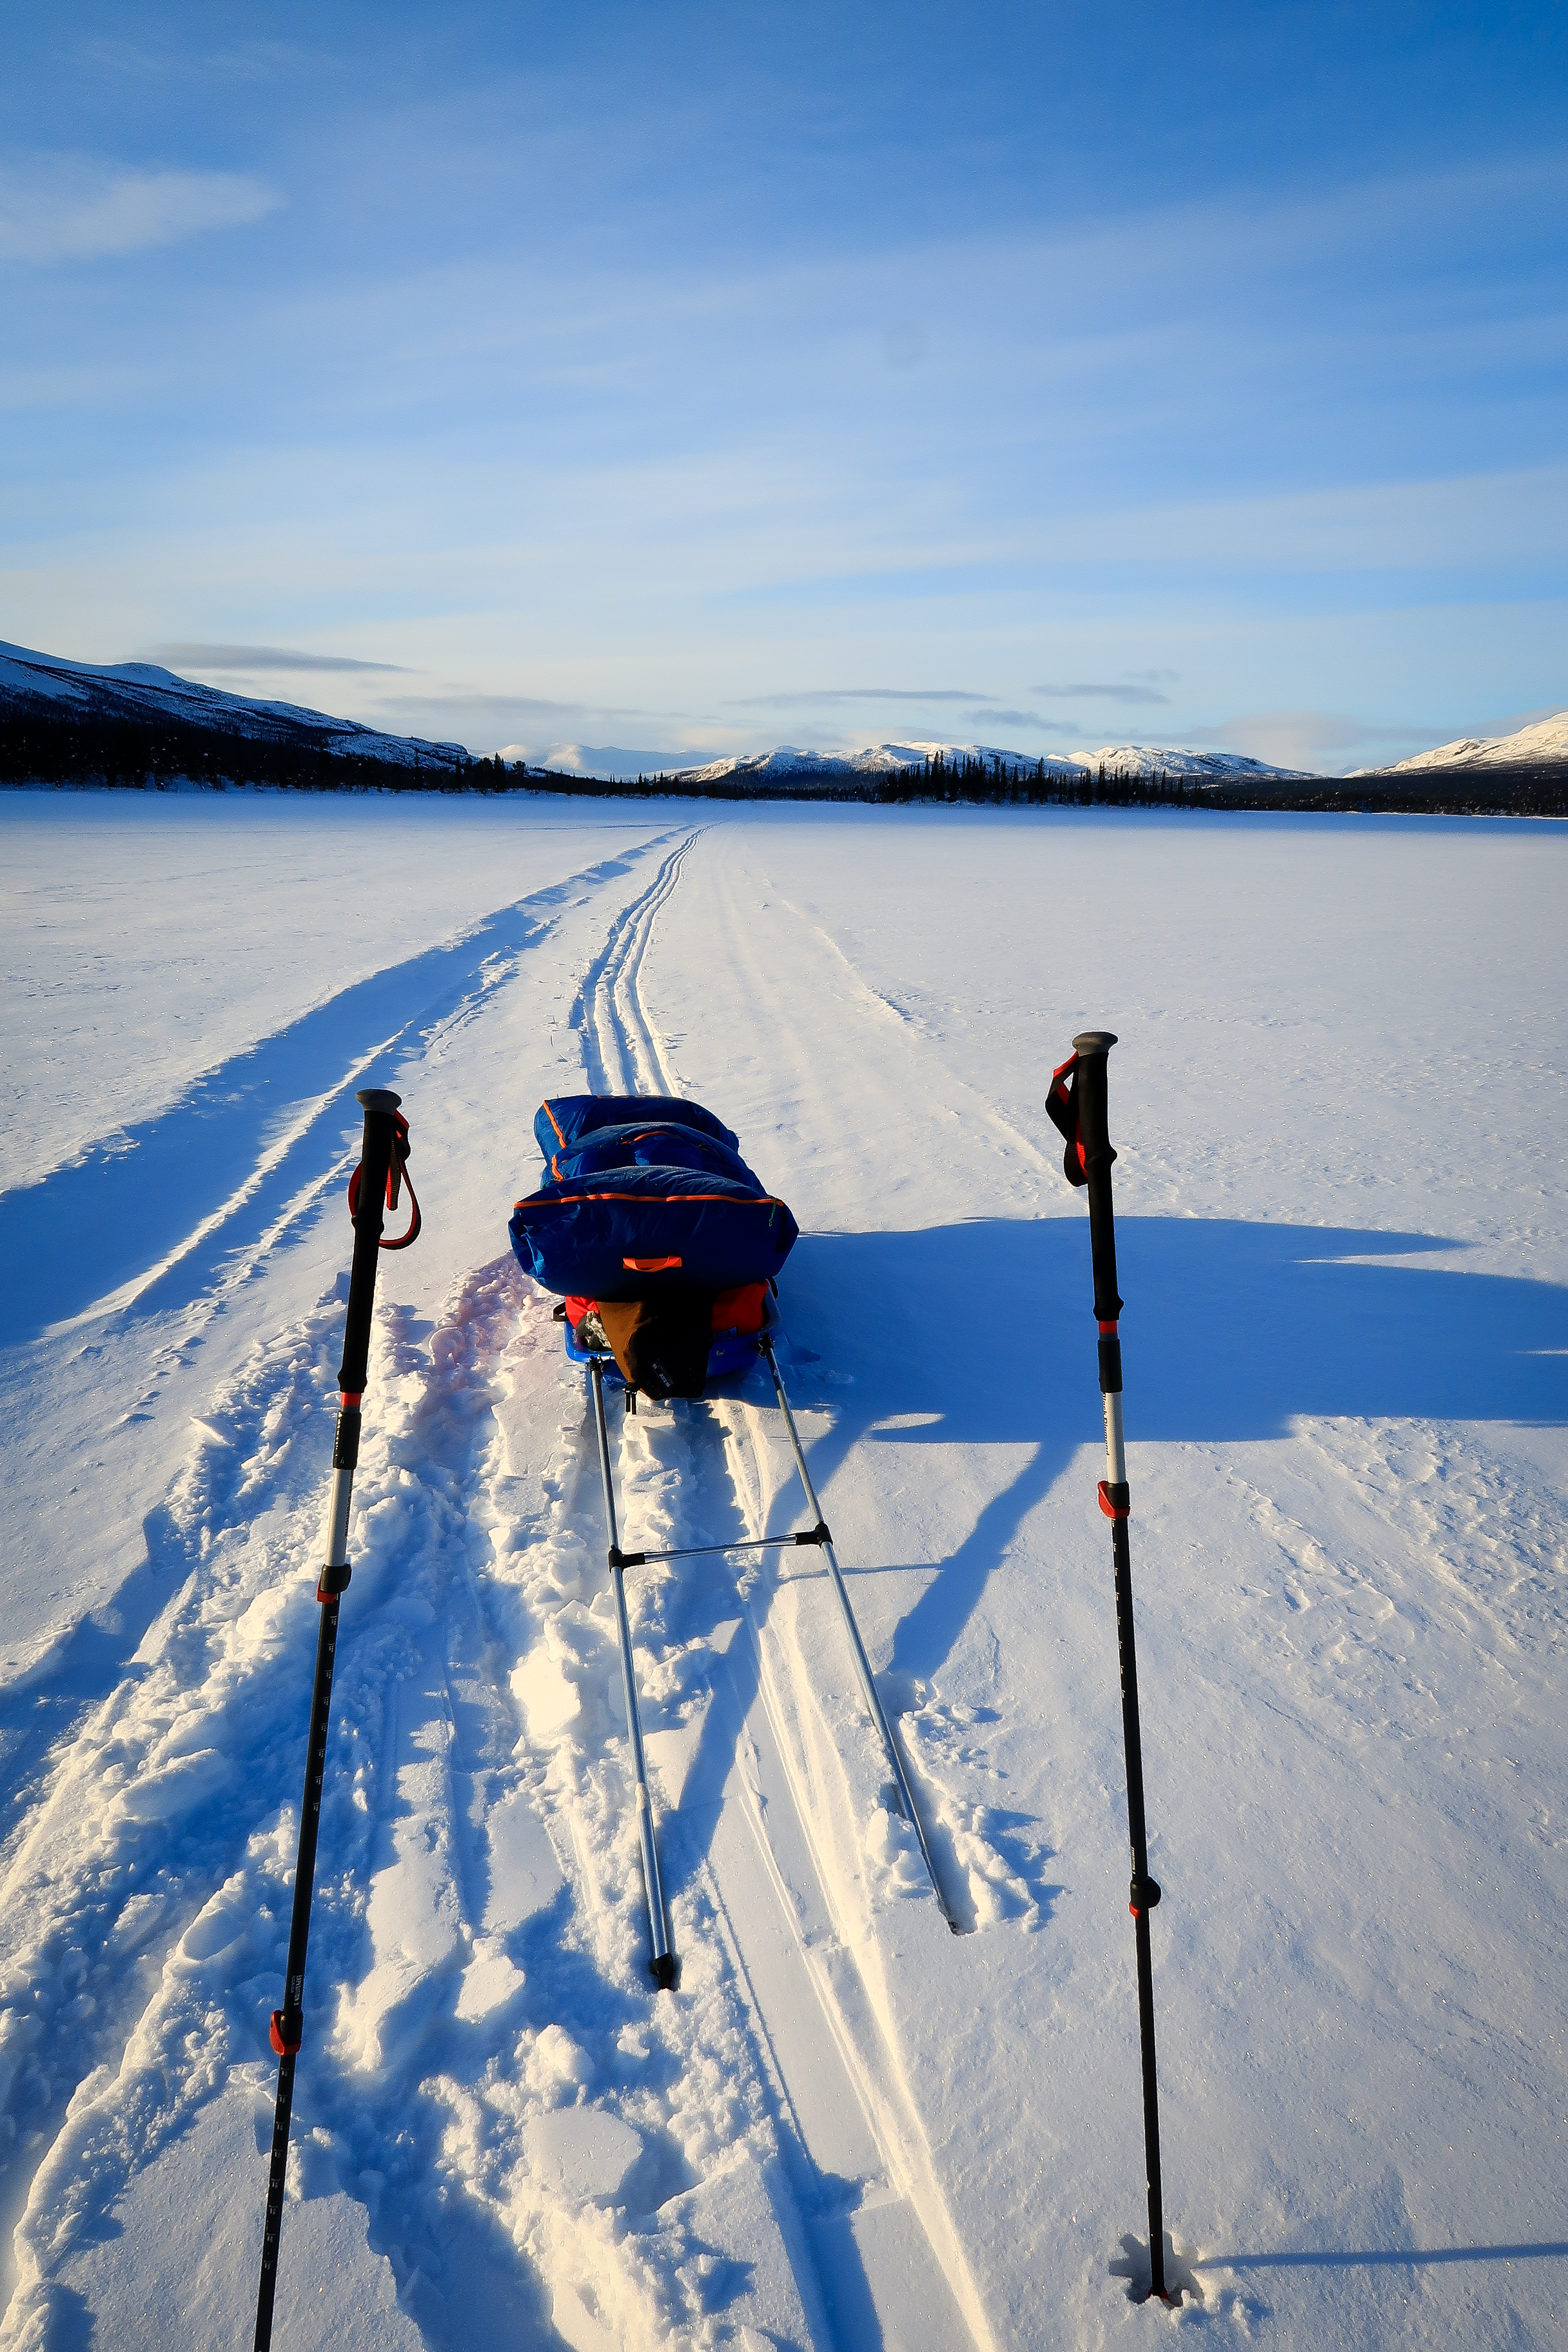 Crossing Frozen Lakes on the Way to Sarek